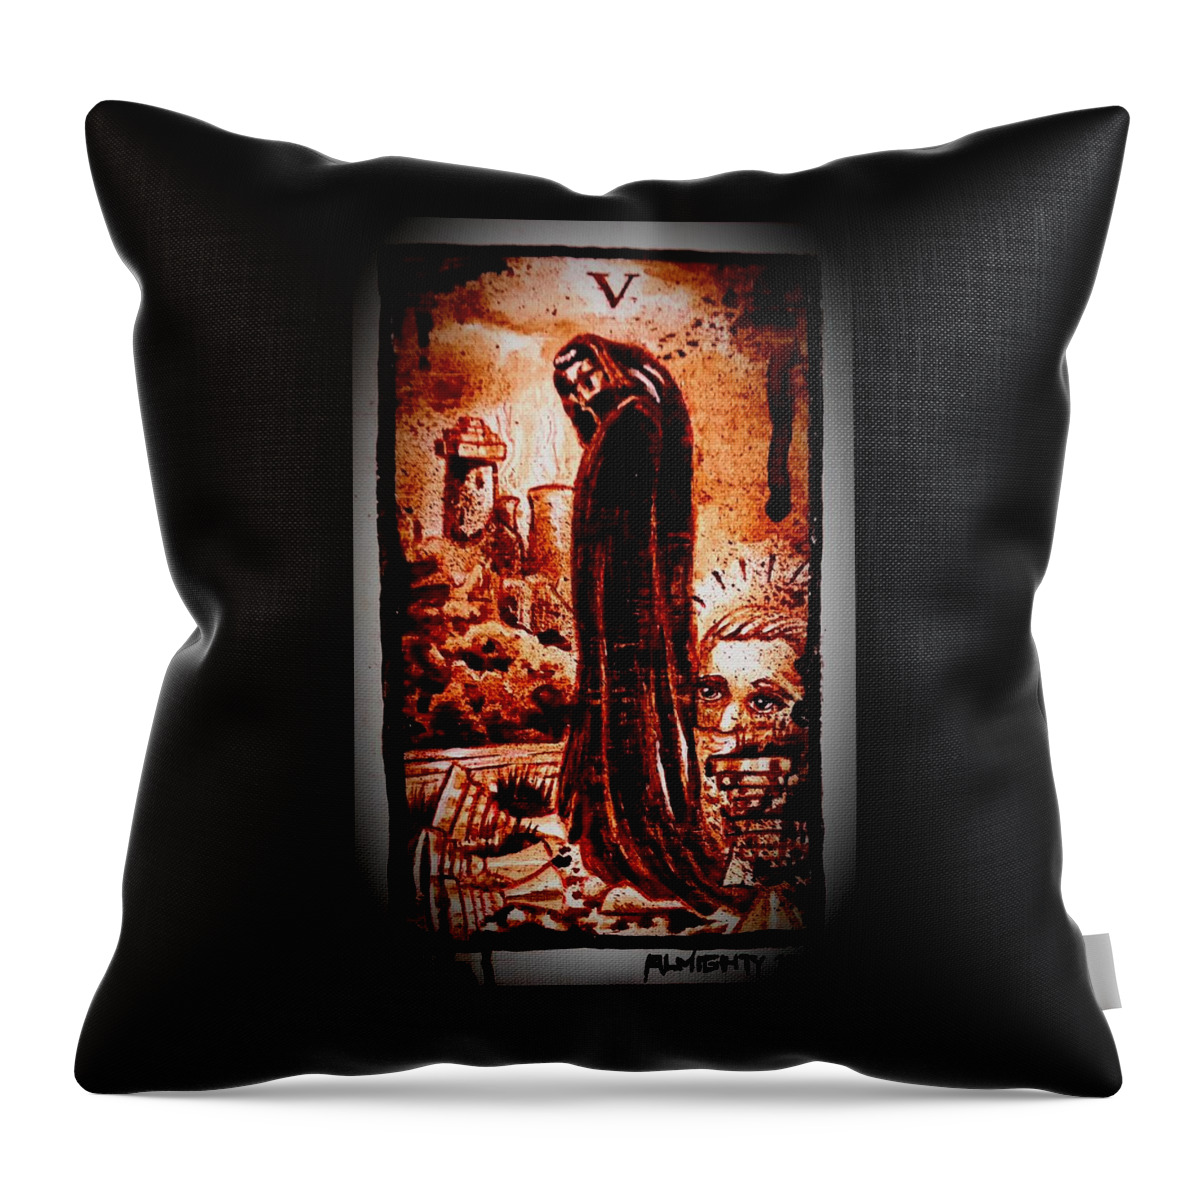 Tarot Throw Pillow featuring the painting Five Of Cups by Ryan Almighty